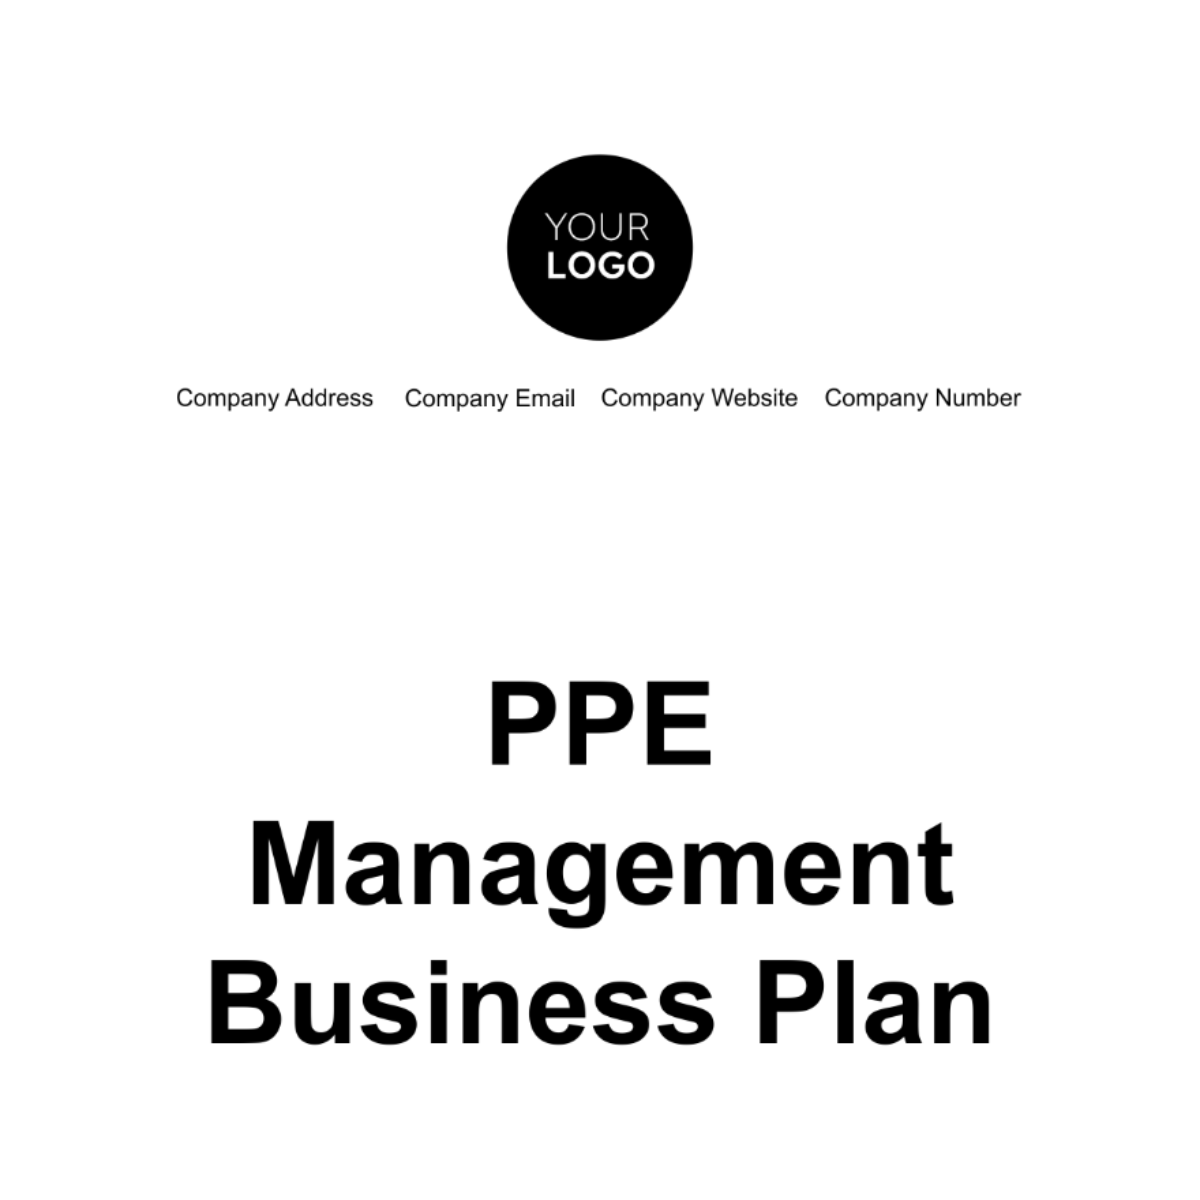 Free PPE Management Business Plan Template